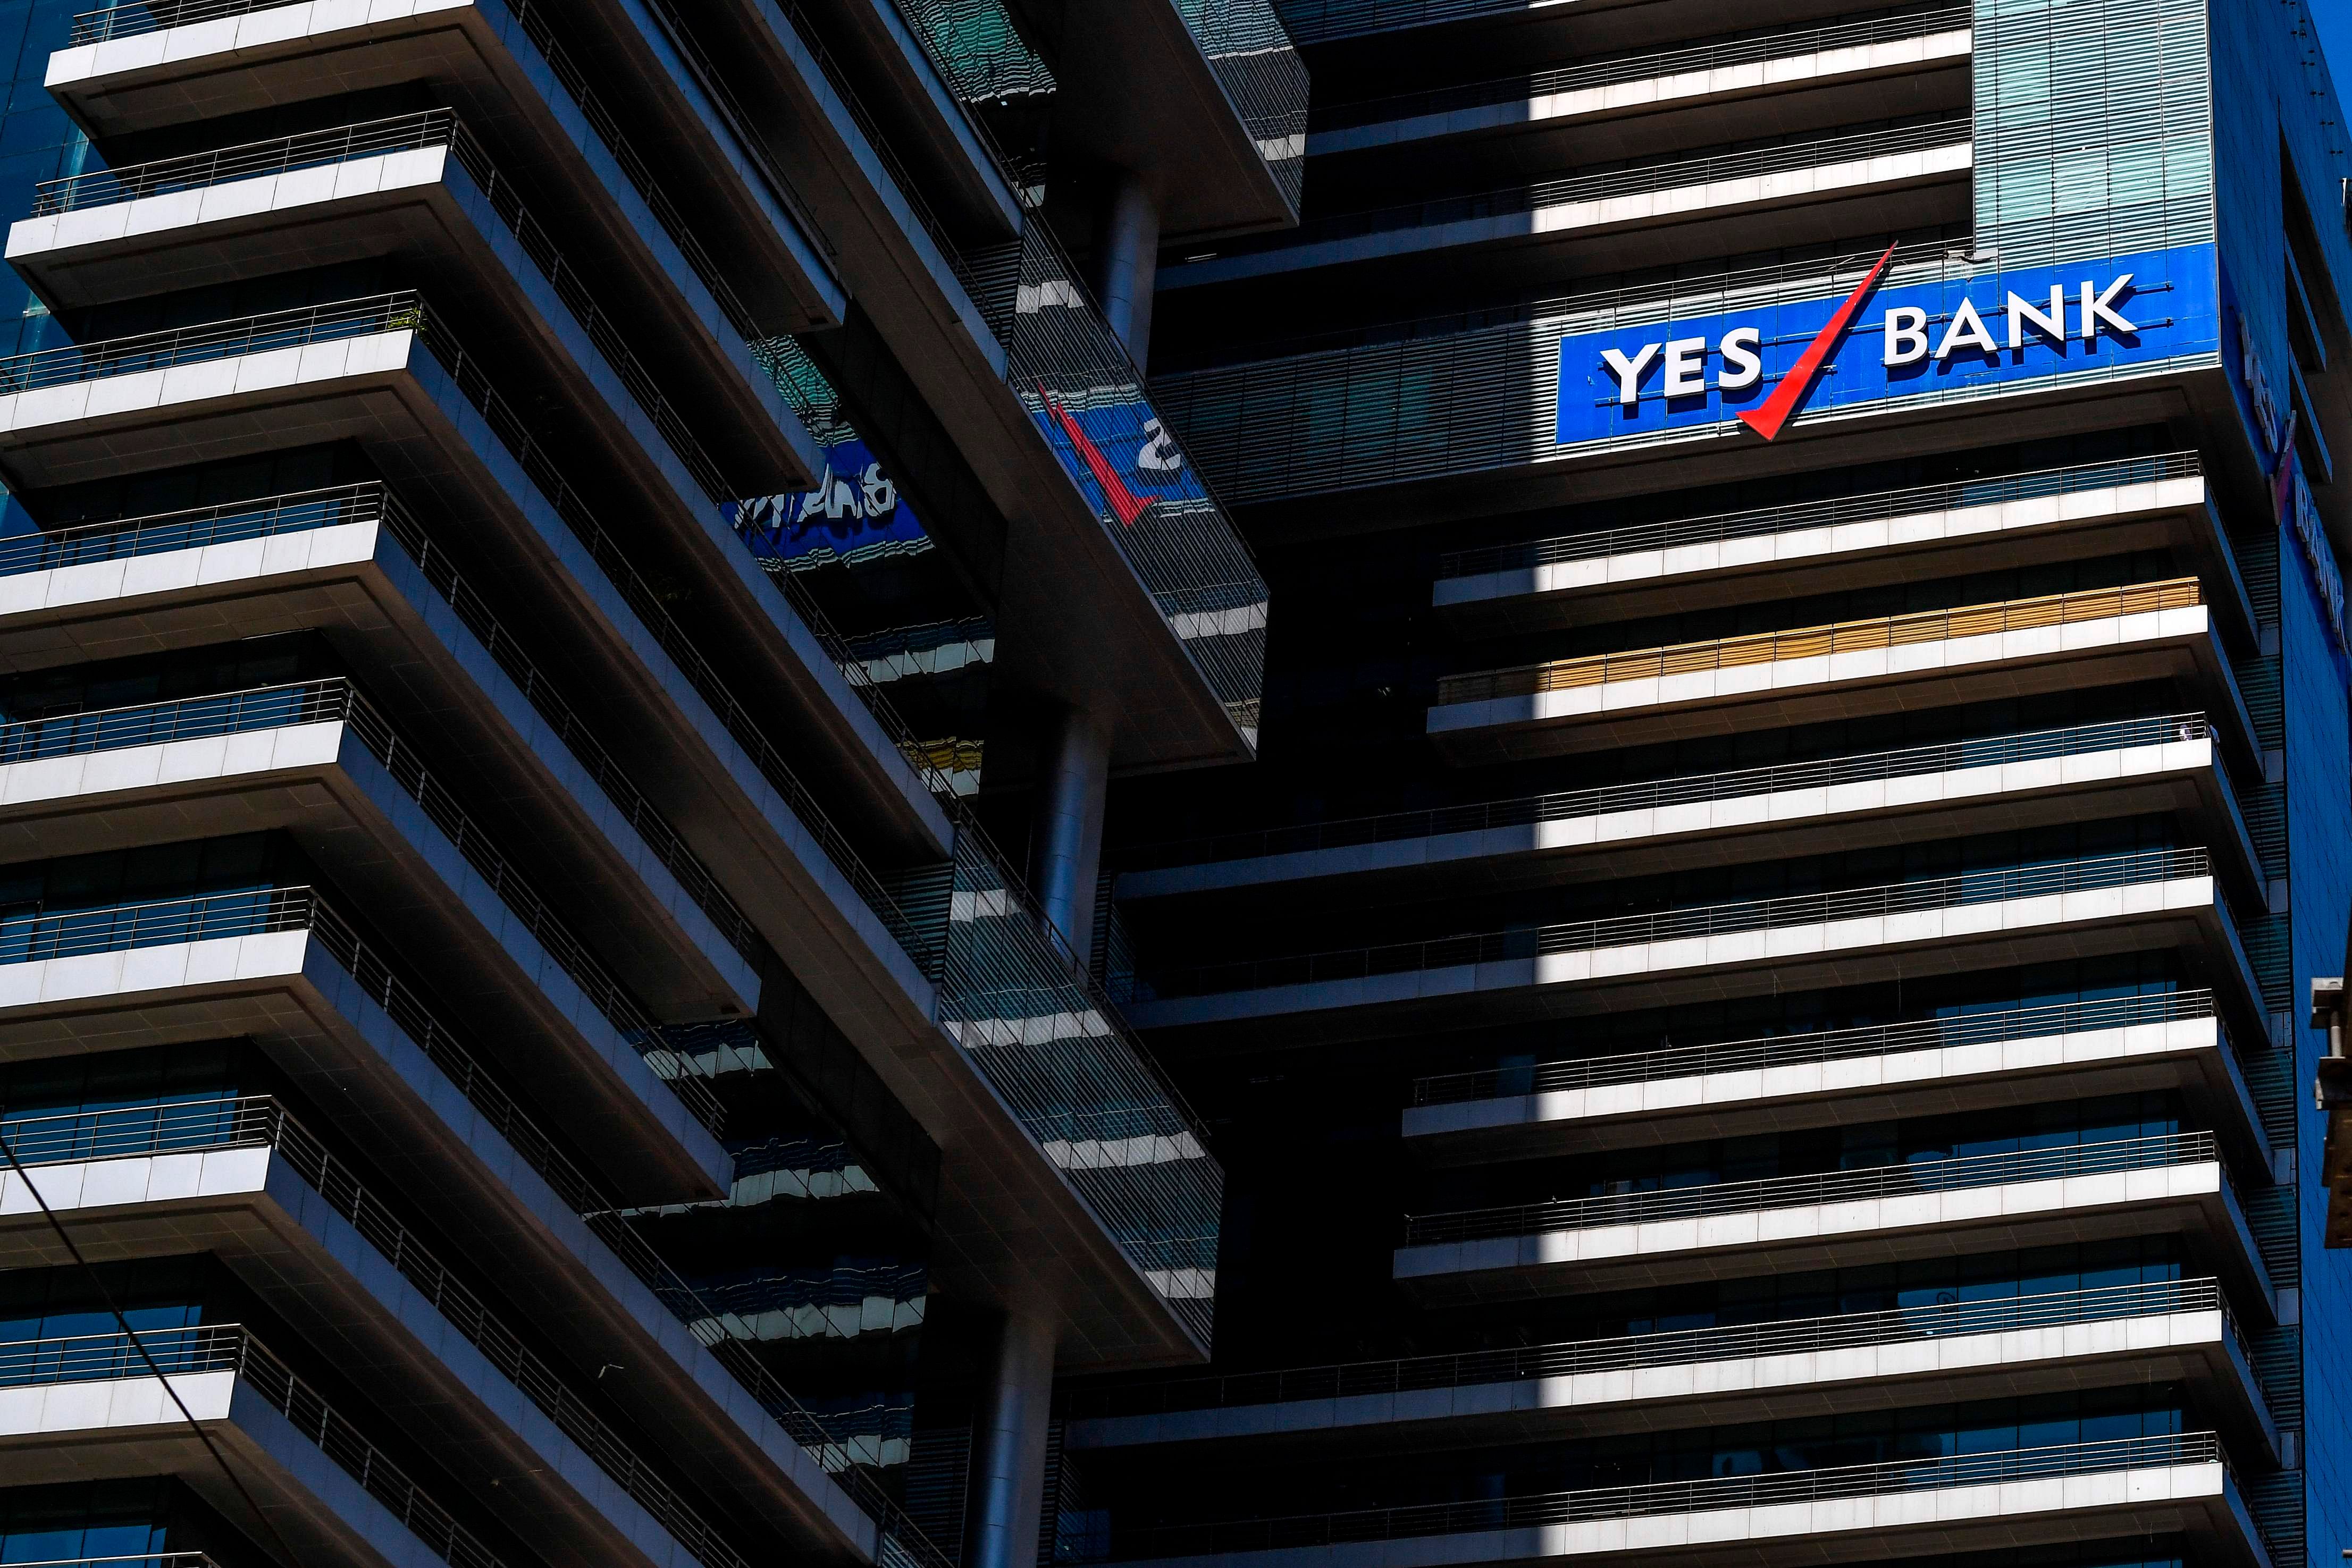 The Yes Bank headquarters in Mumbai. (Credit: AFP)